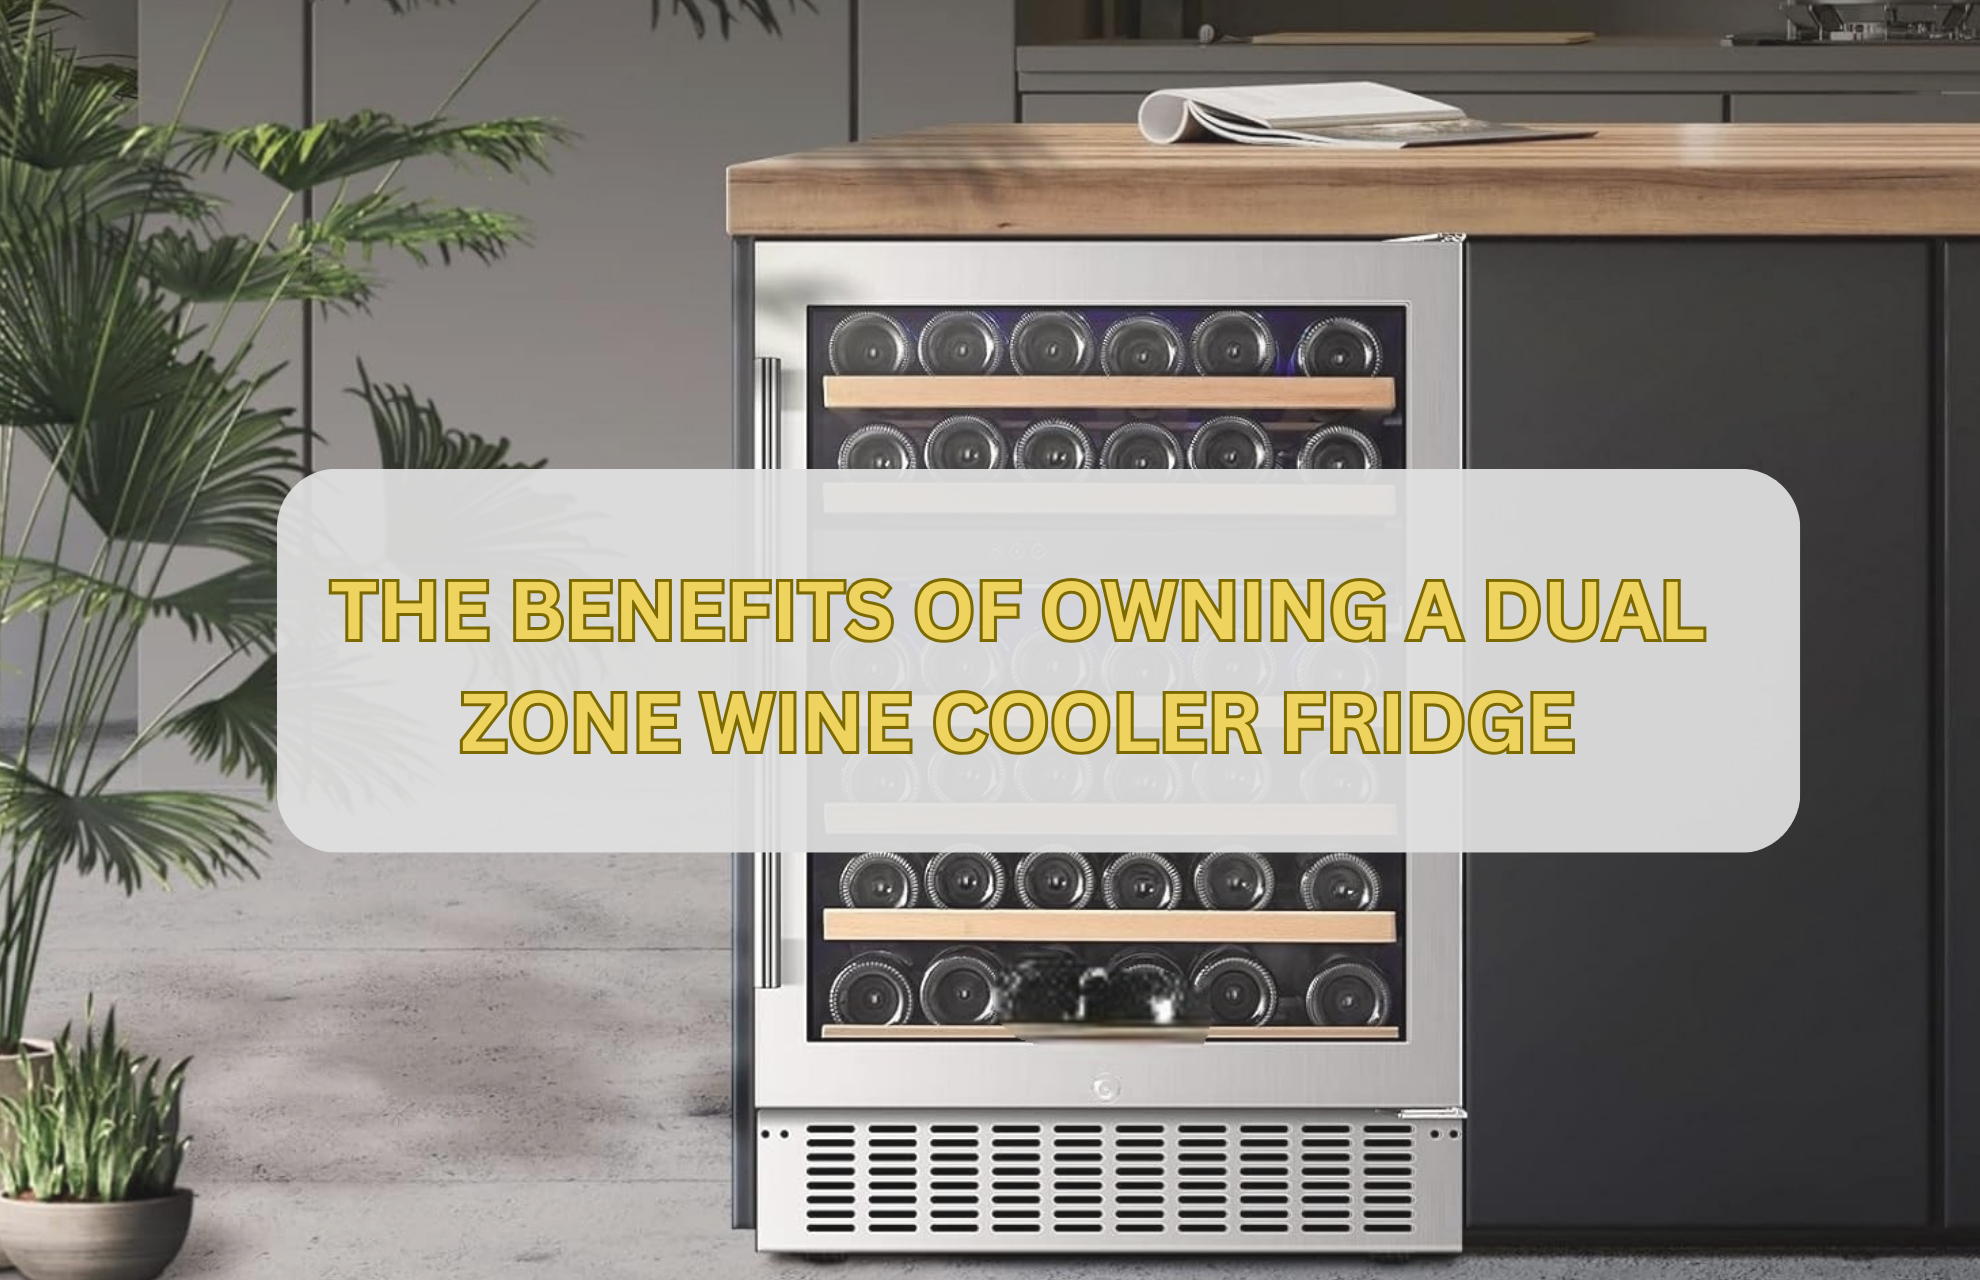 THE BENEFITS OF OWNING A DUAL ZONE WINE COOLER FRIDGE